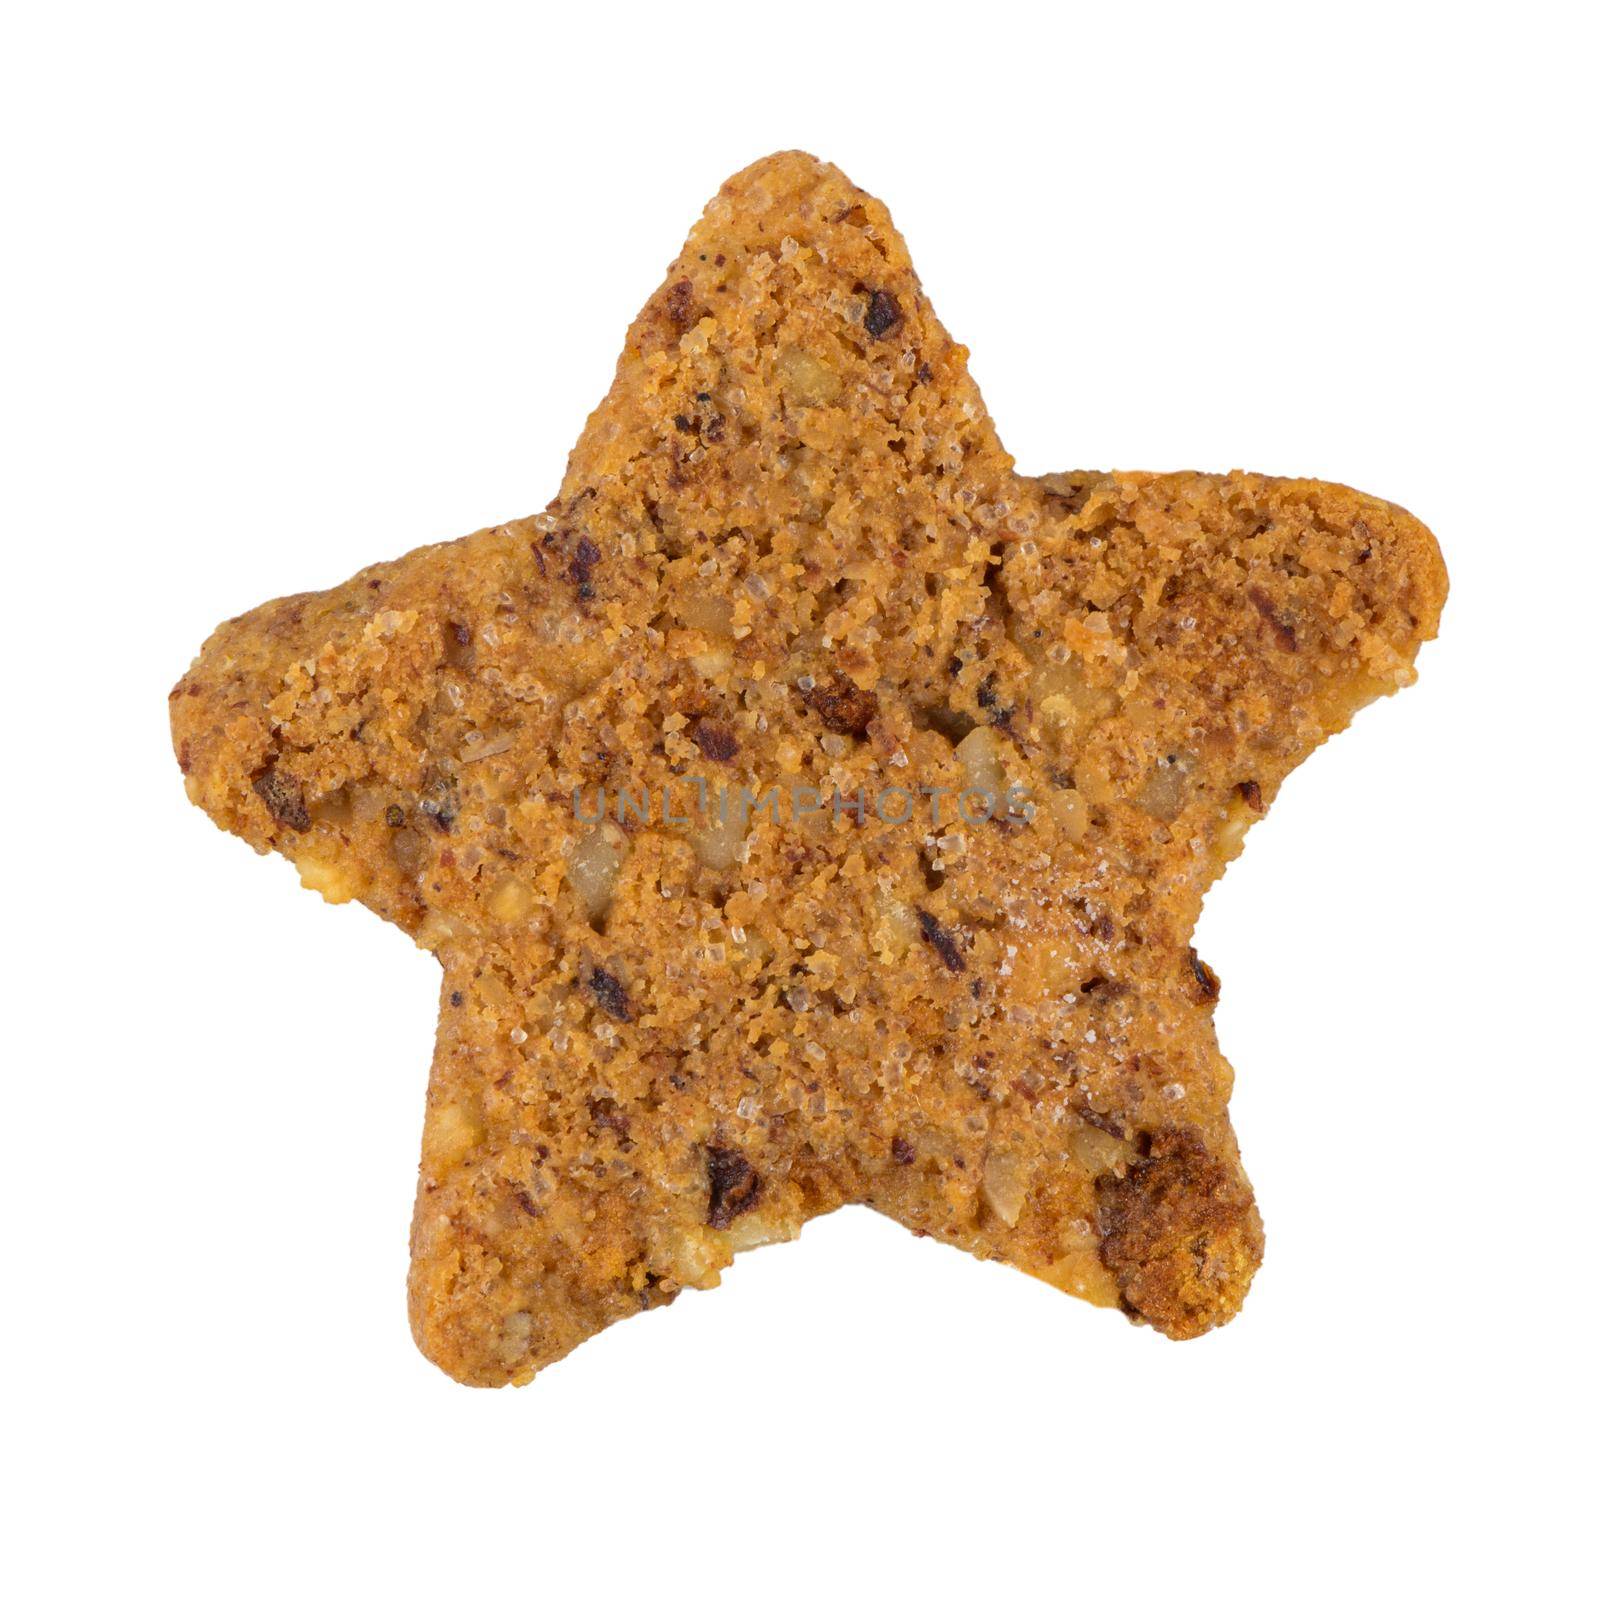 Cinnamon Star biscuit isolated on white background.